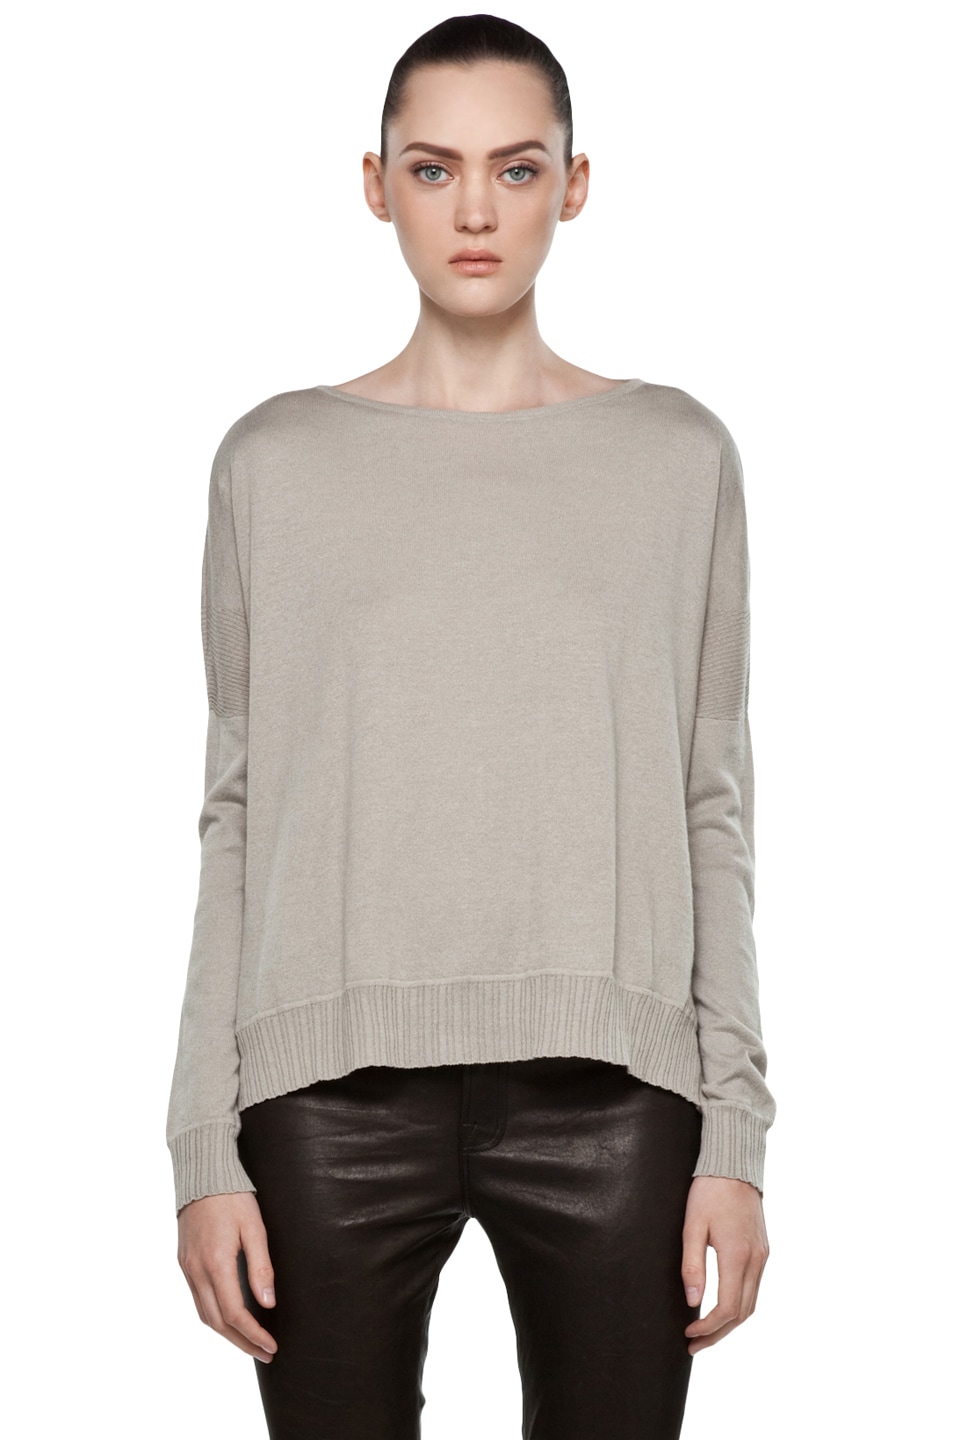 SILENT DAMIR DOMA SILENT by Damir Doma Kasay Cropped Sweater in Silent ...